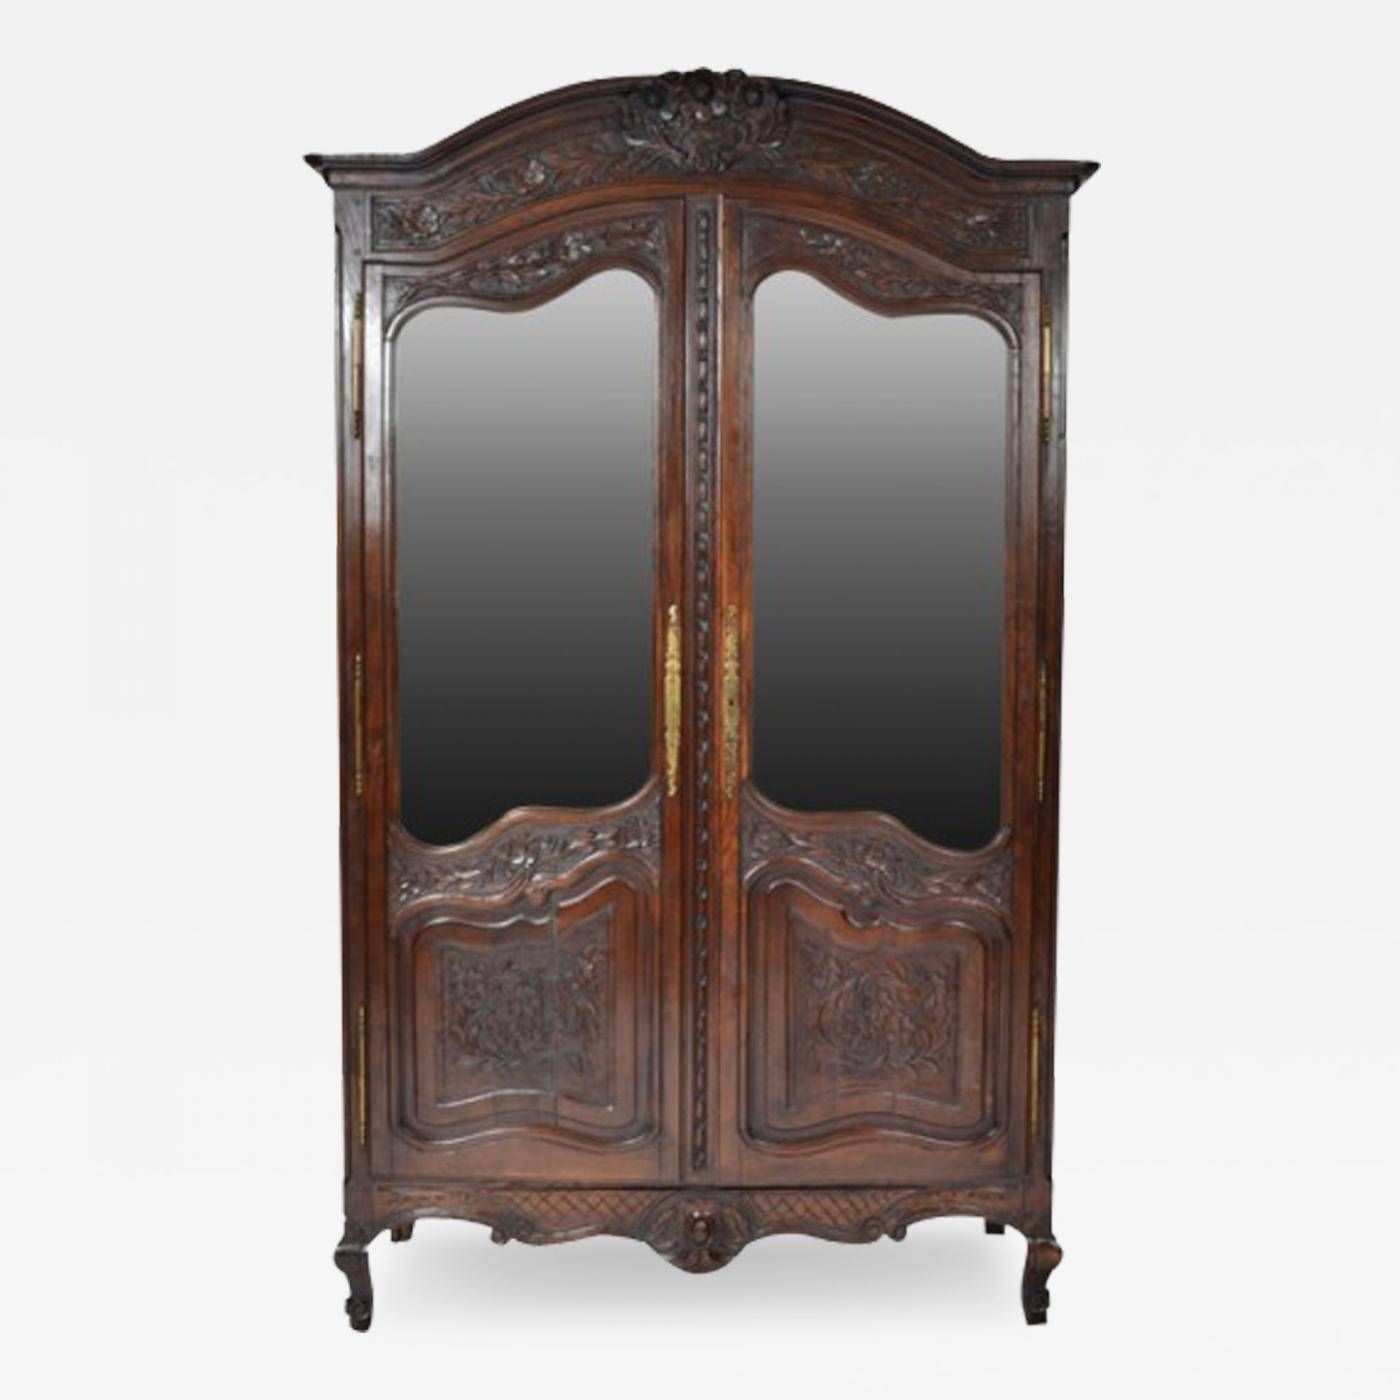 Antique French Provincial Oak Louis Xv Mirrored Door Armoire Wardrobe Inside Antique Style Wardrobes (View 14 of 15)